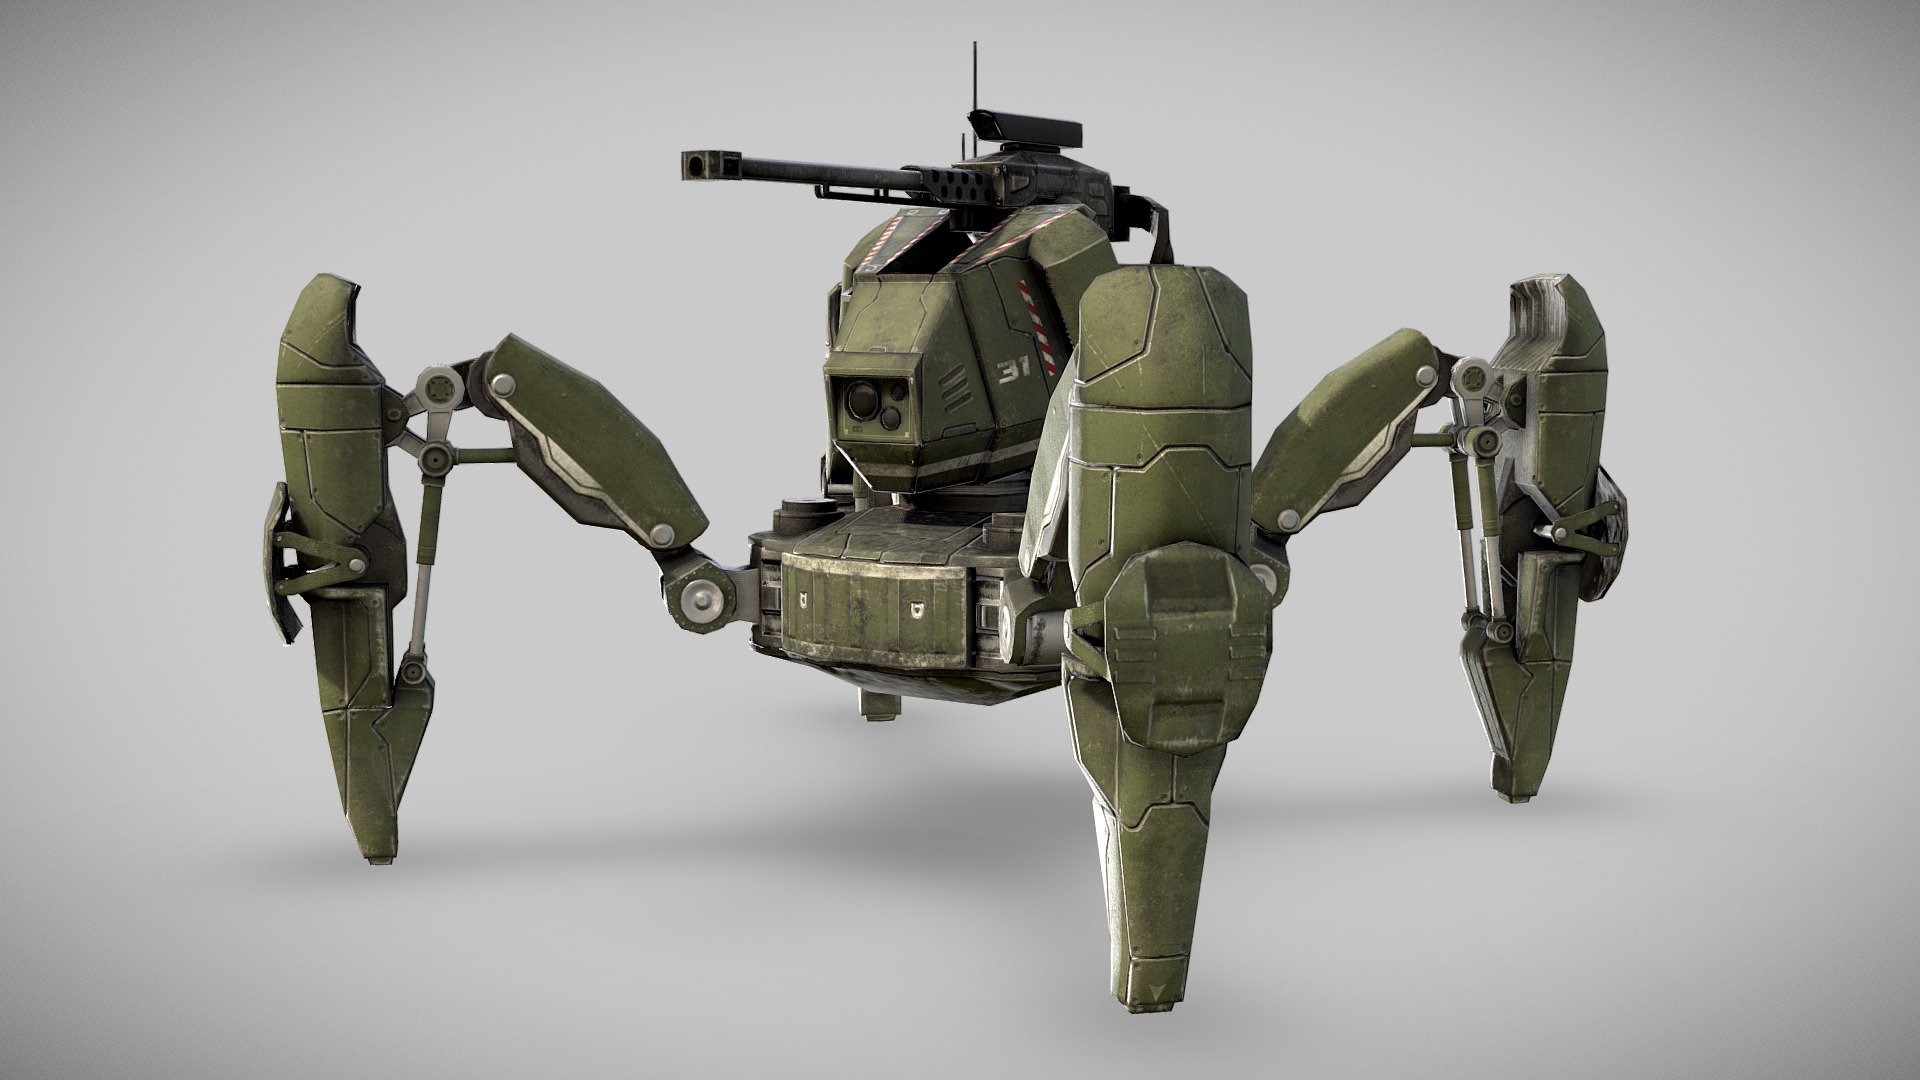 The model is a unit for a top down turn based game im working on. This units main purpose is for dealing high damage at long range. 

The mech is its used in ambushes on convoys, mainly deployed remotley it will relocate to a vantage point and wait until any enemy units come in range.

Modeled in Maya. Textured in Quixel/photshop 2048x2048 3d model